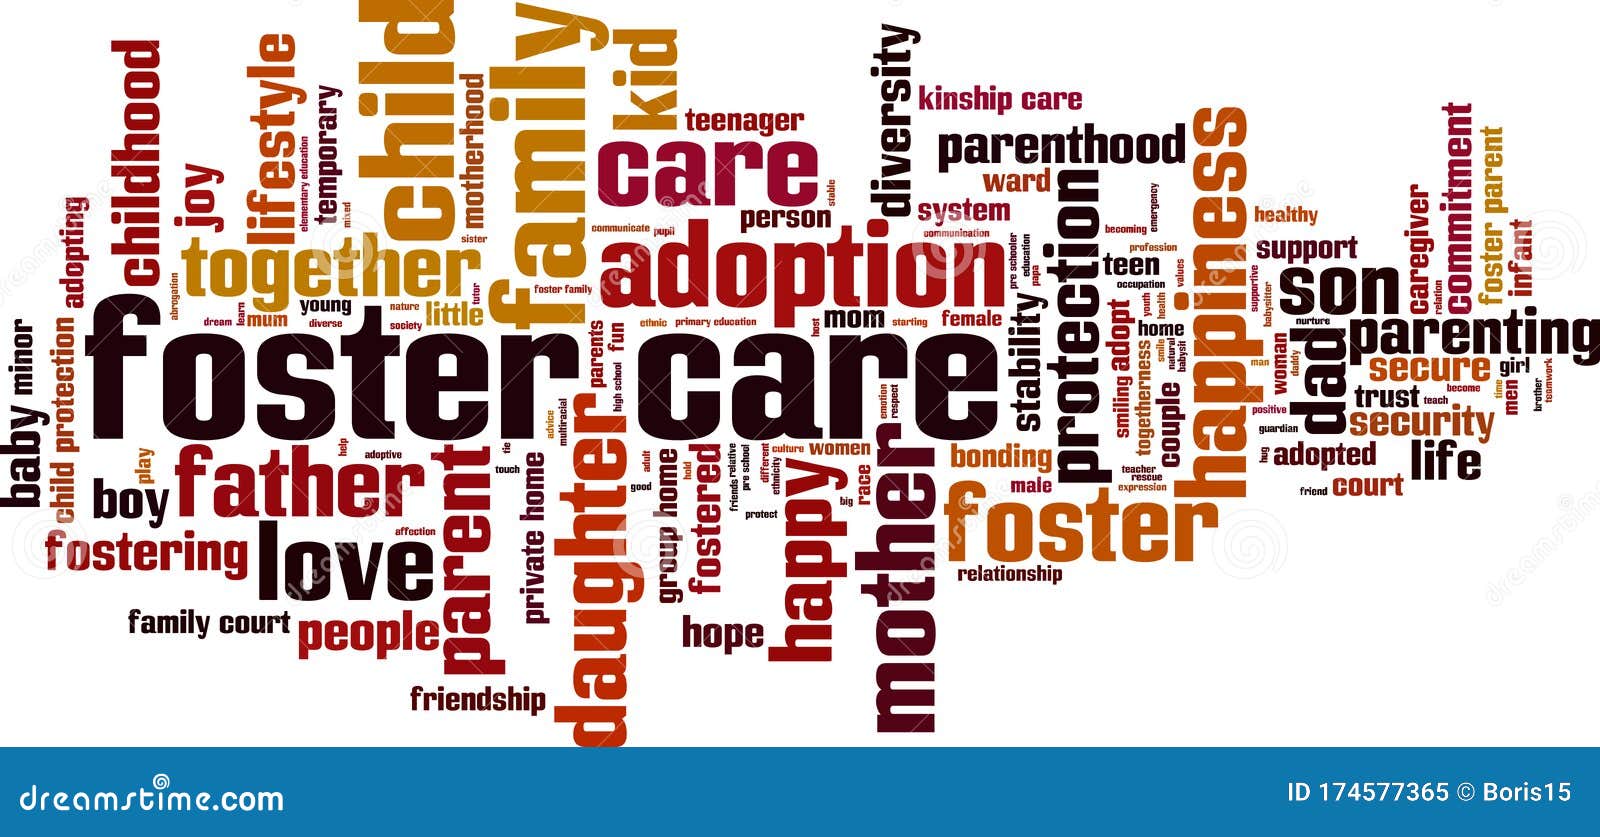 foster care word cloud